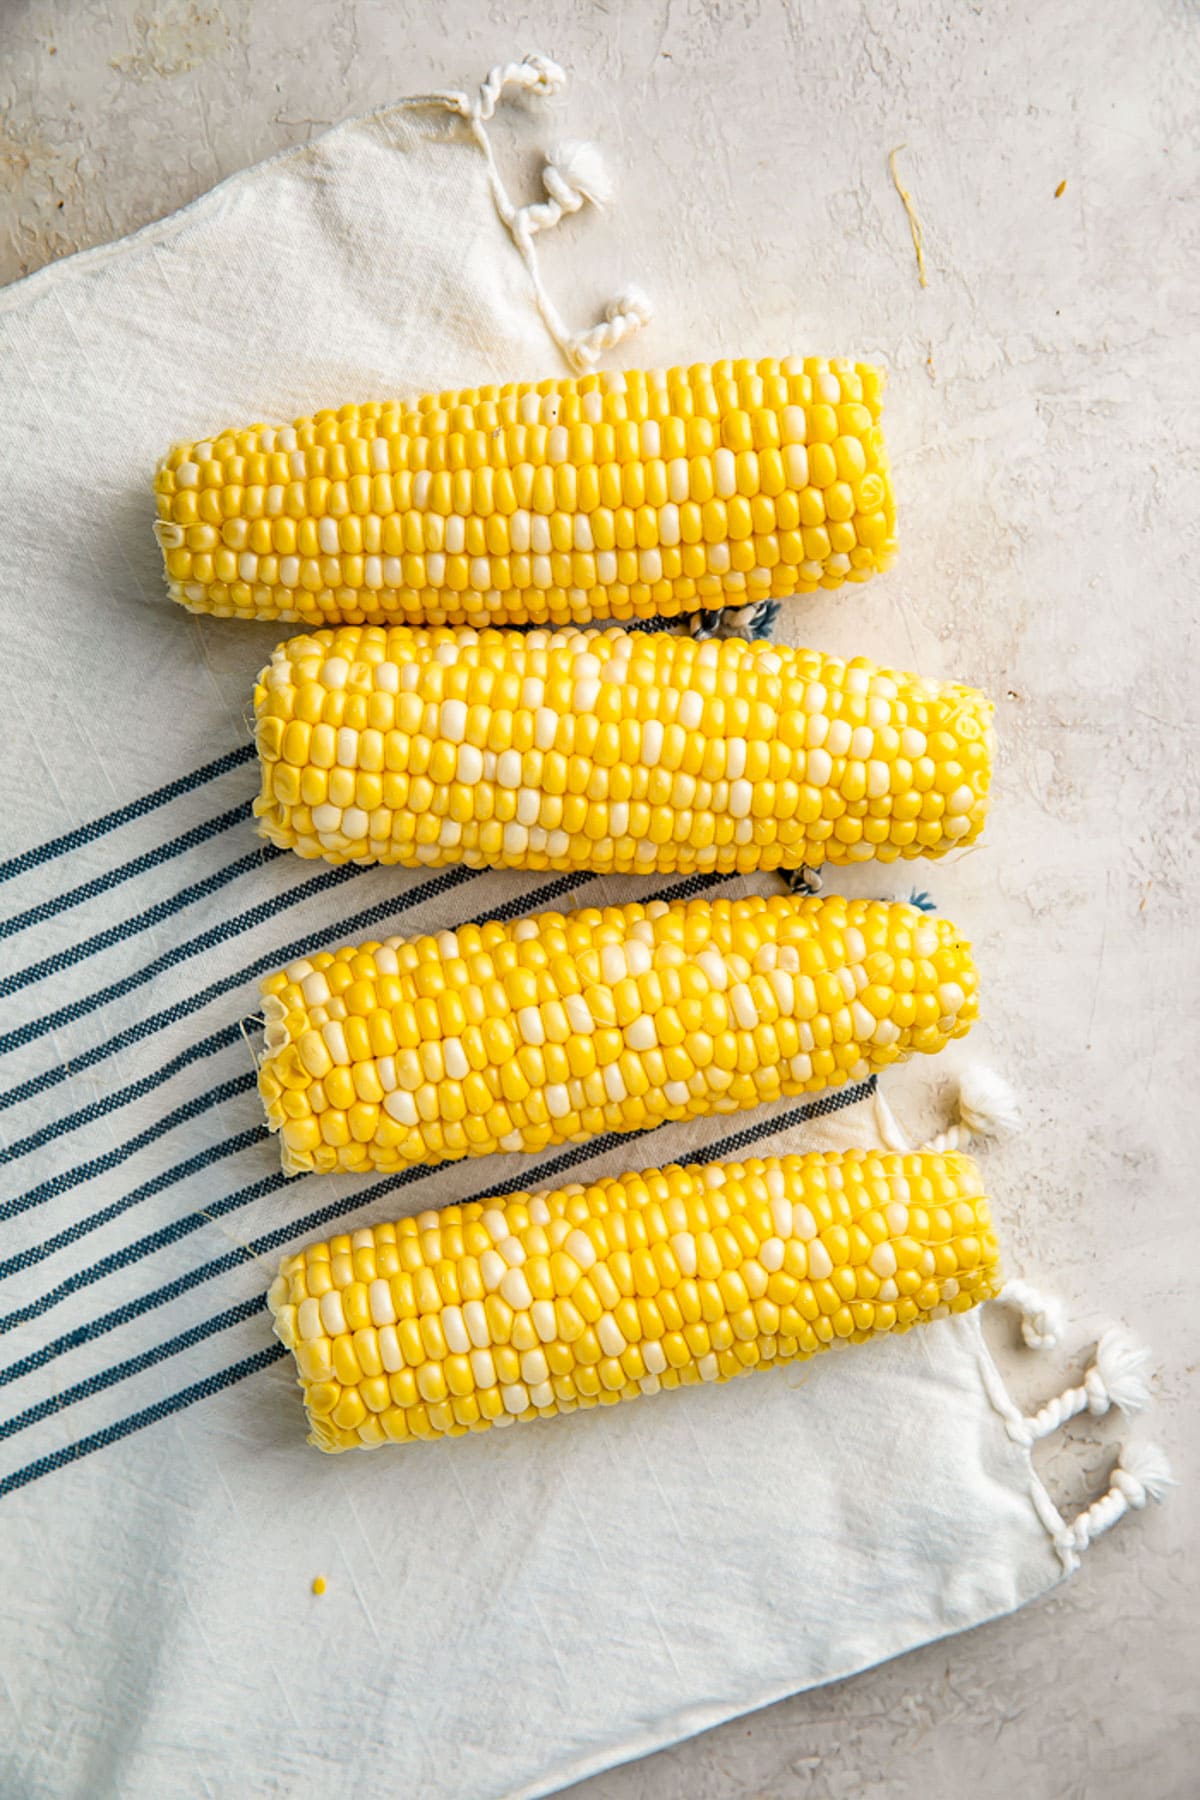 4 ears of raw, shucked corn on the cob on a neutral table with a cloth napkin.